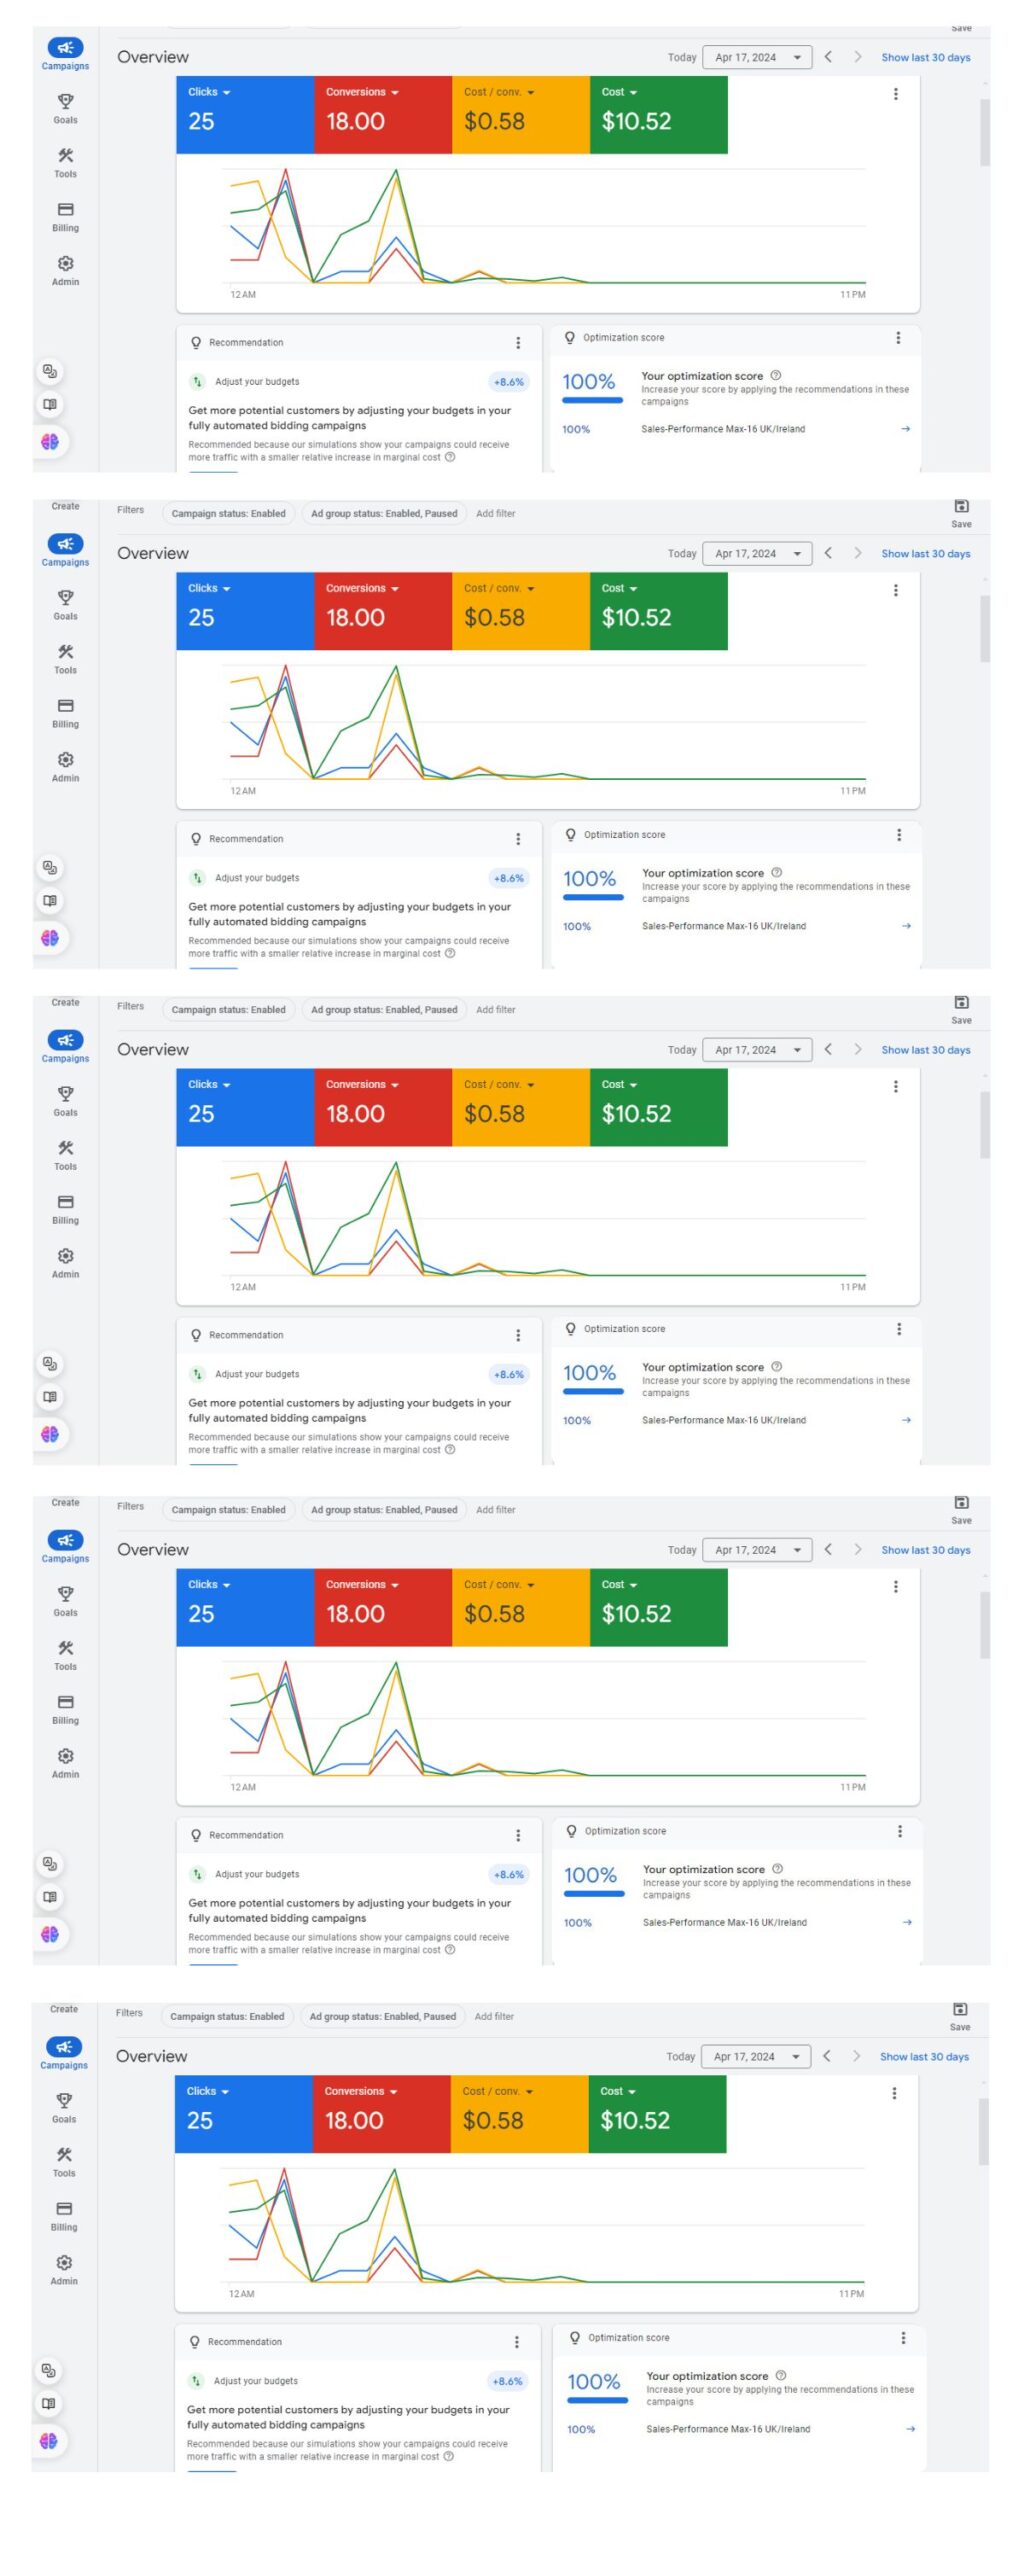 Travell Agency Overview Ads Fighter Google ads optimize setup manage